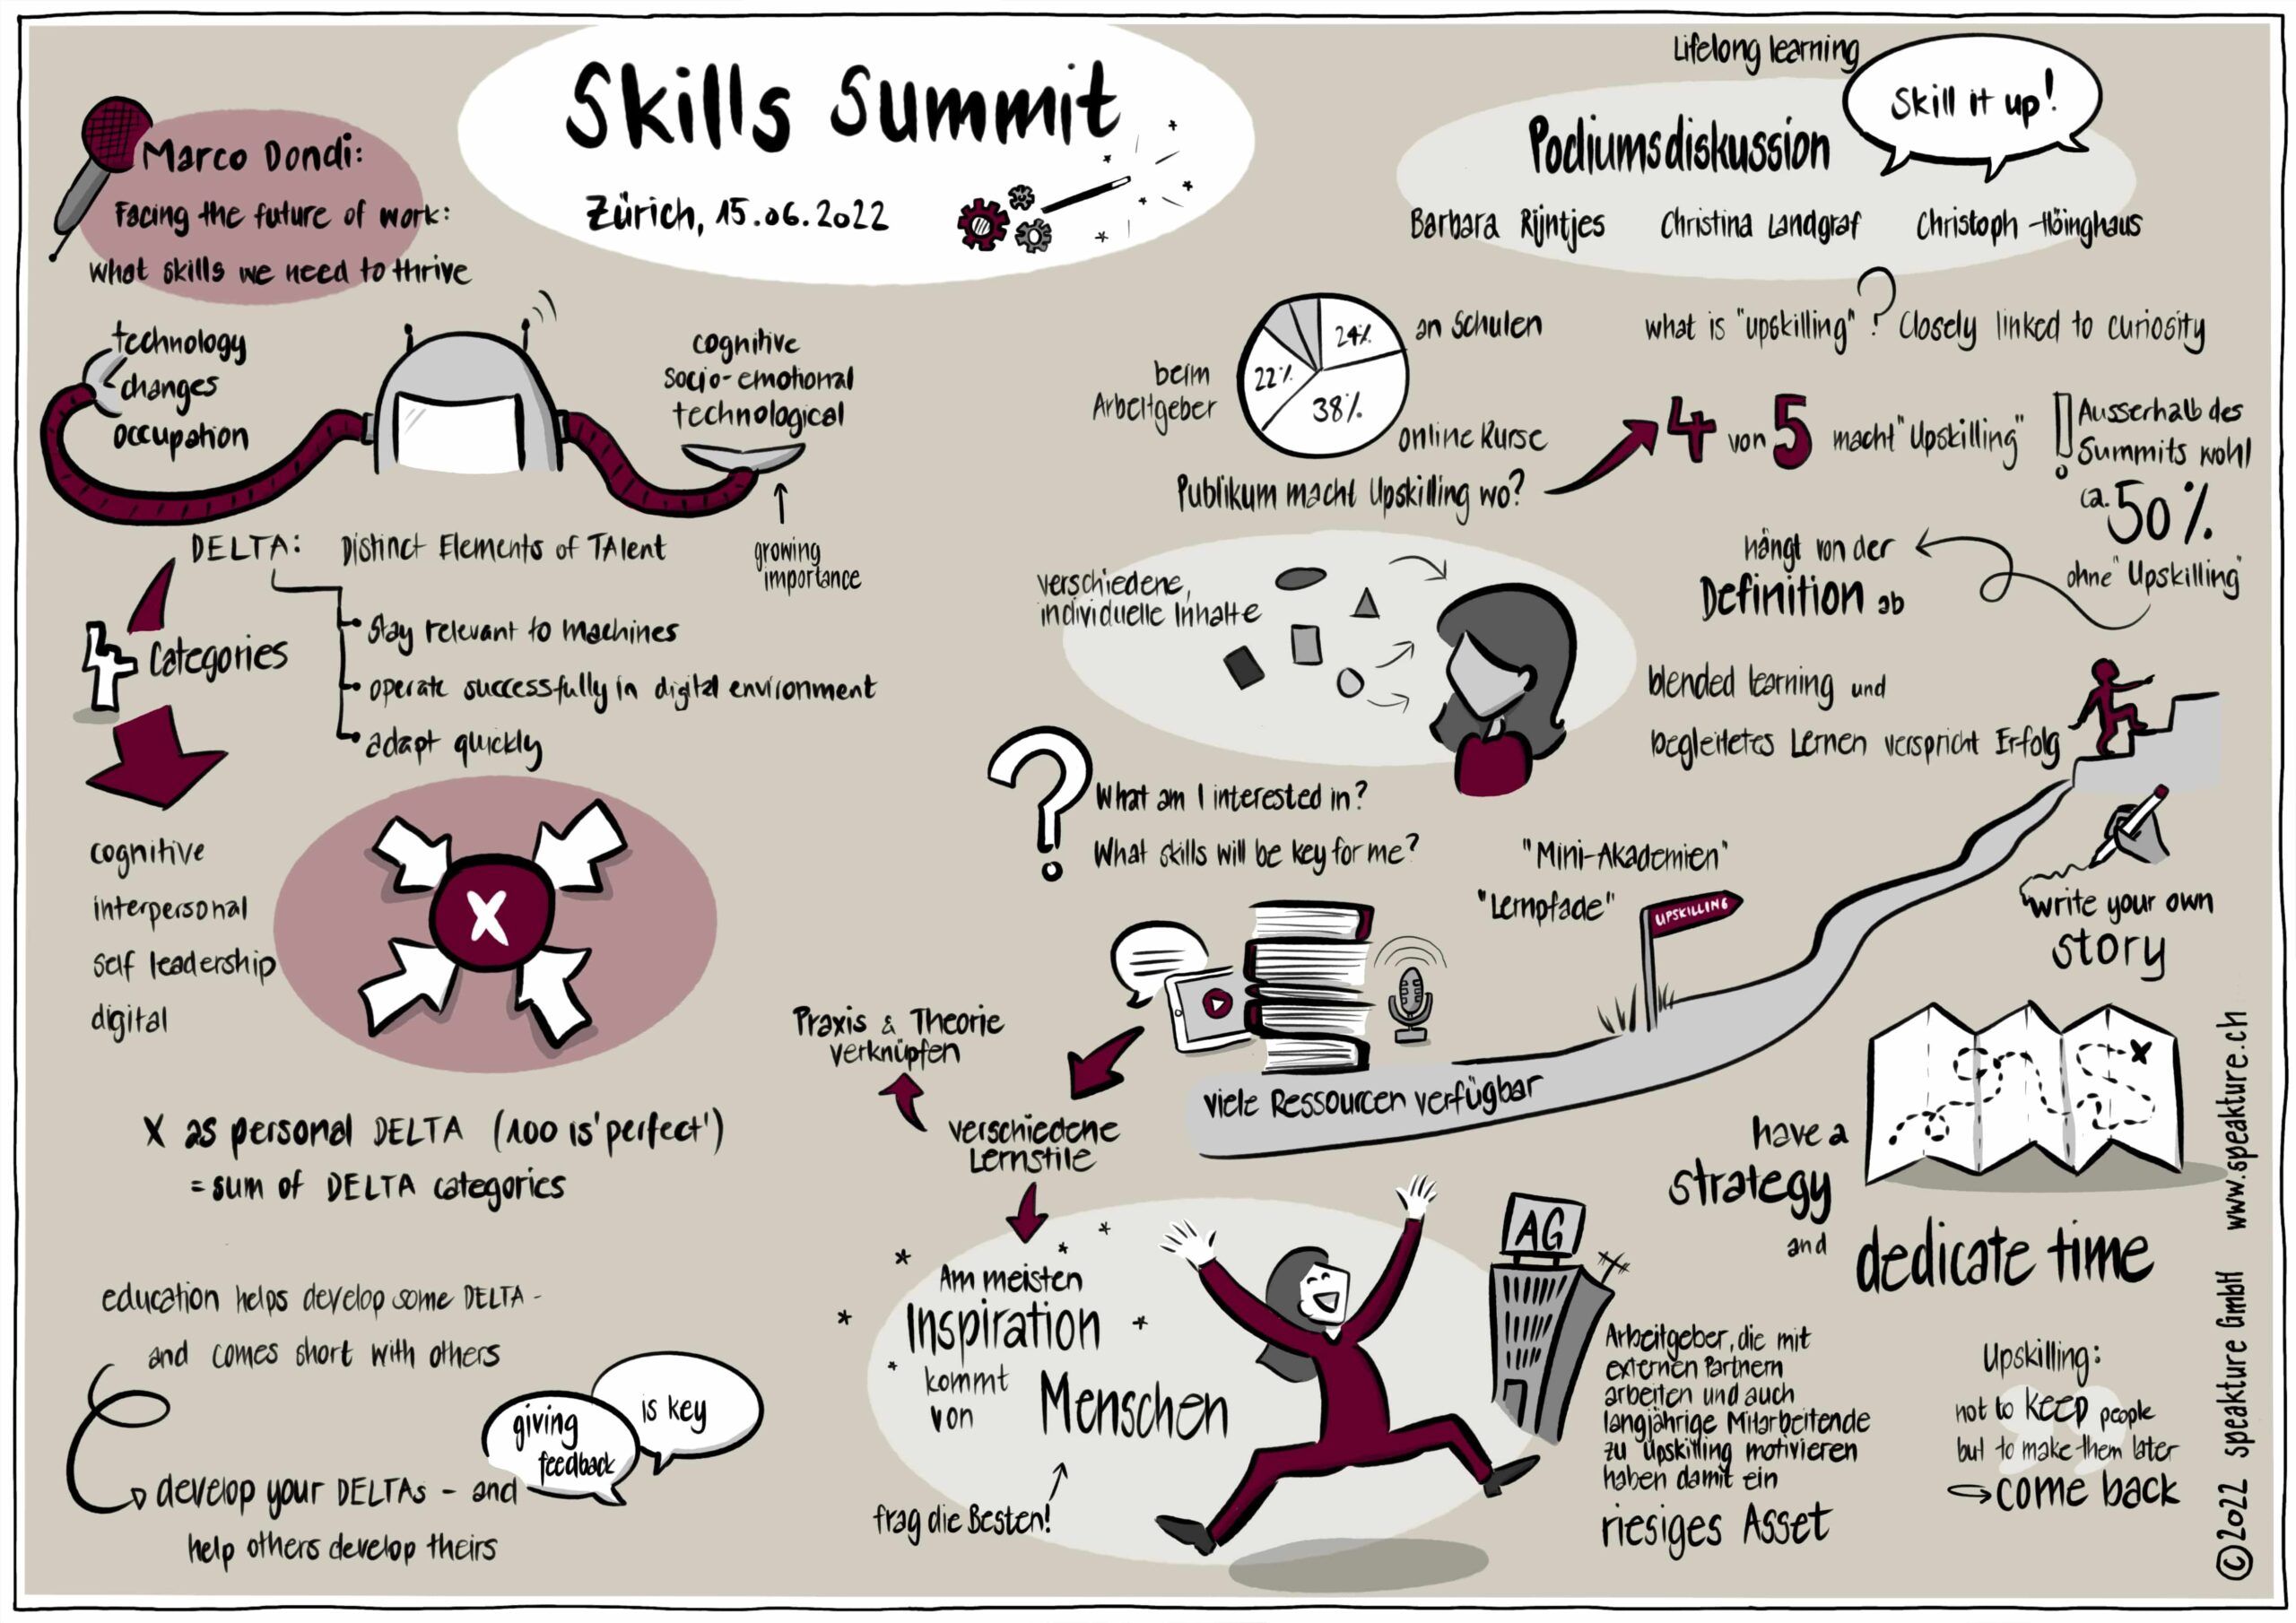 Graphic Recording by speakture for the Skills Summit 2022 in Switzerland, visually summarizing a key note on skills and a panel discussion on upskilling, life long learning and learning strategies